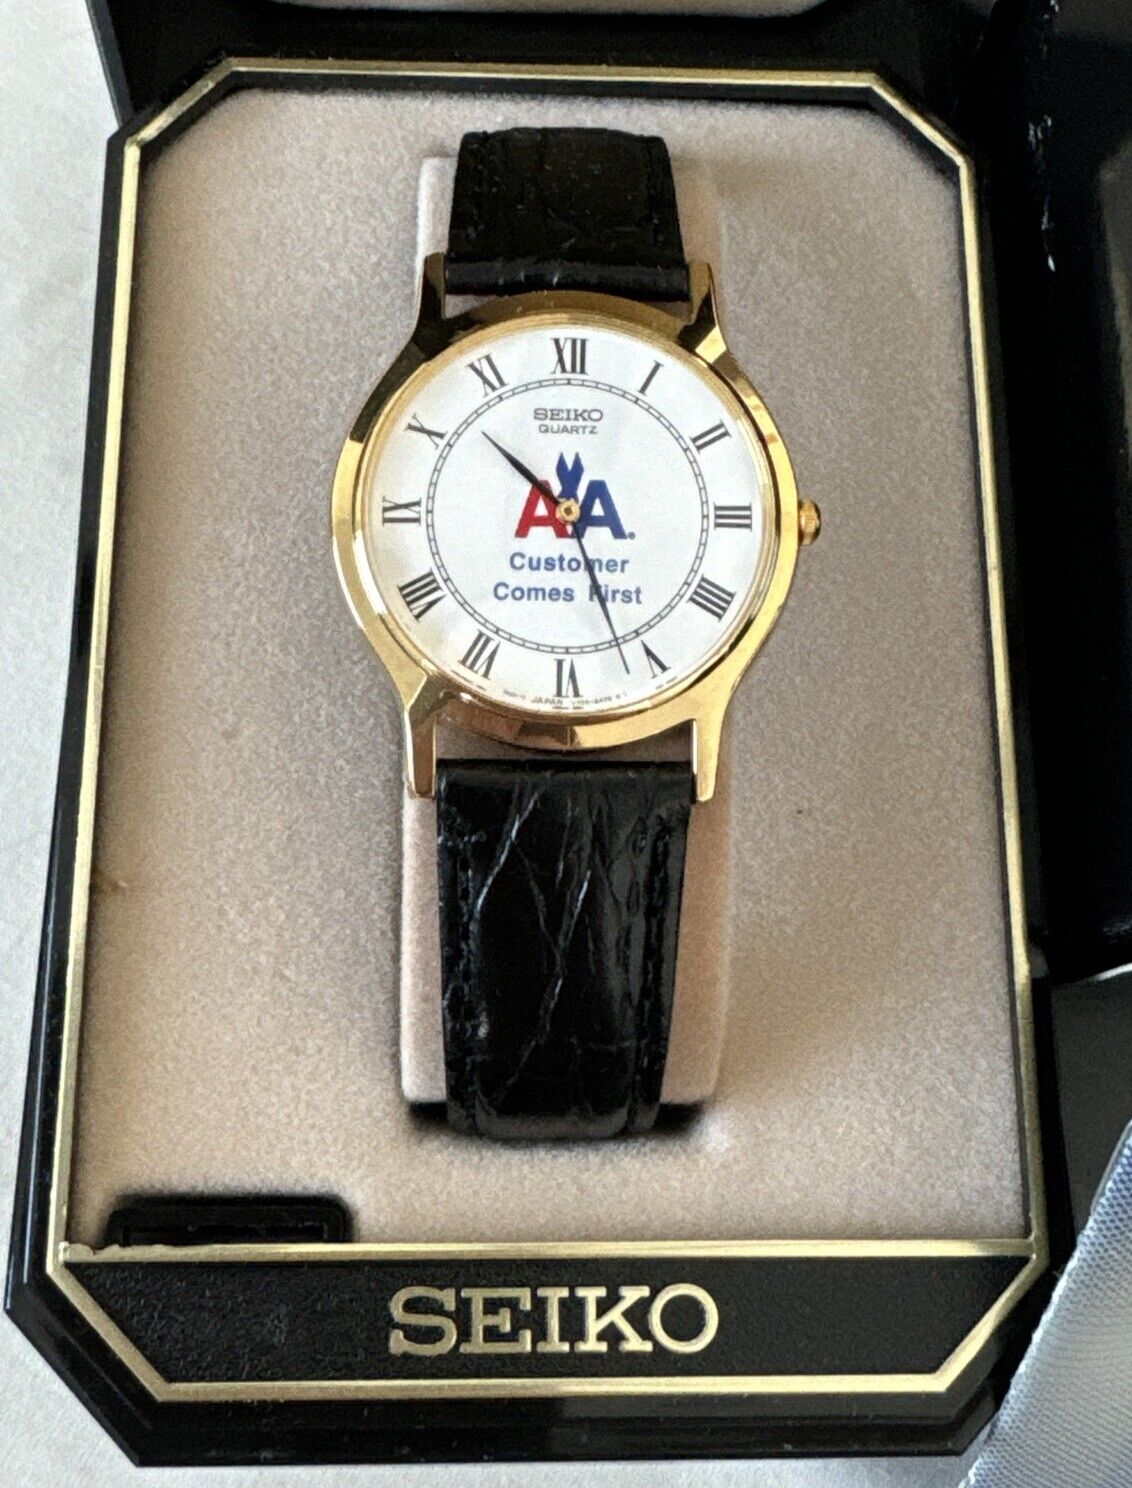 NOS VINTAGE SEIKO AMERICAN AIRLINES RARE CUSTOMER COMES FIRST MENS WATCH SJB022